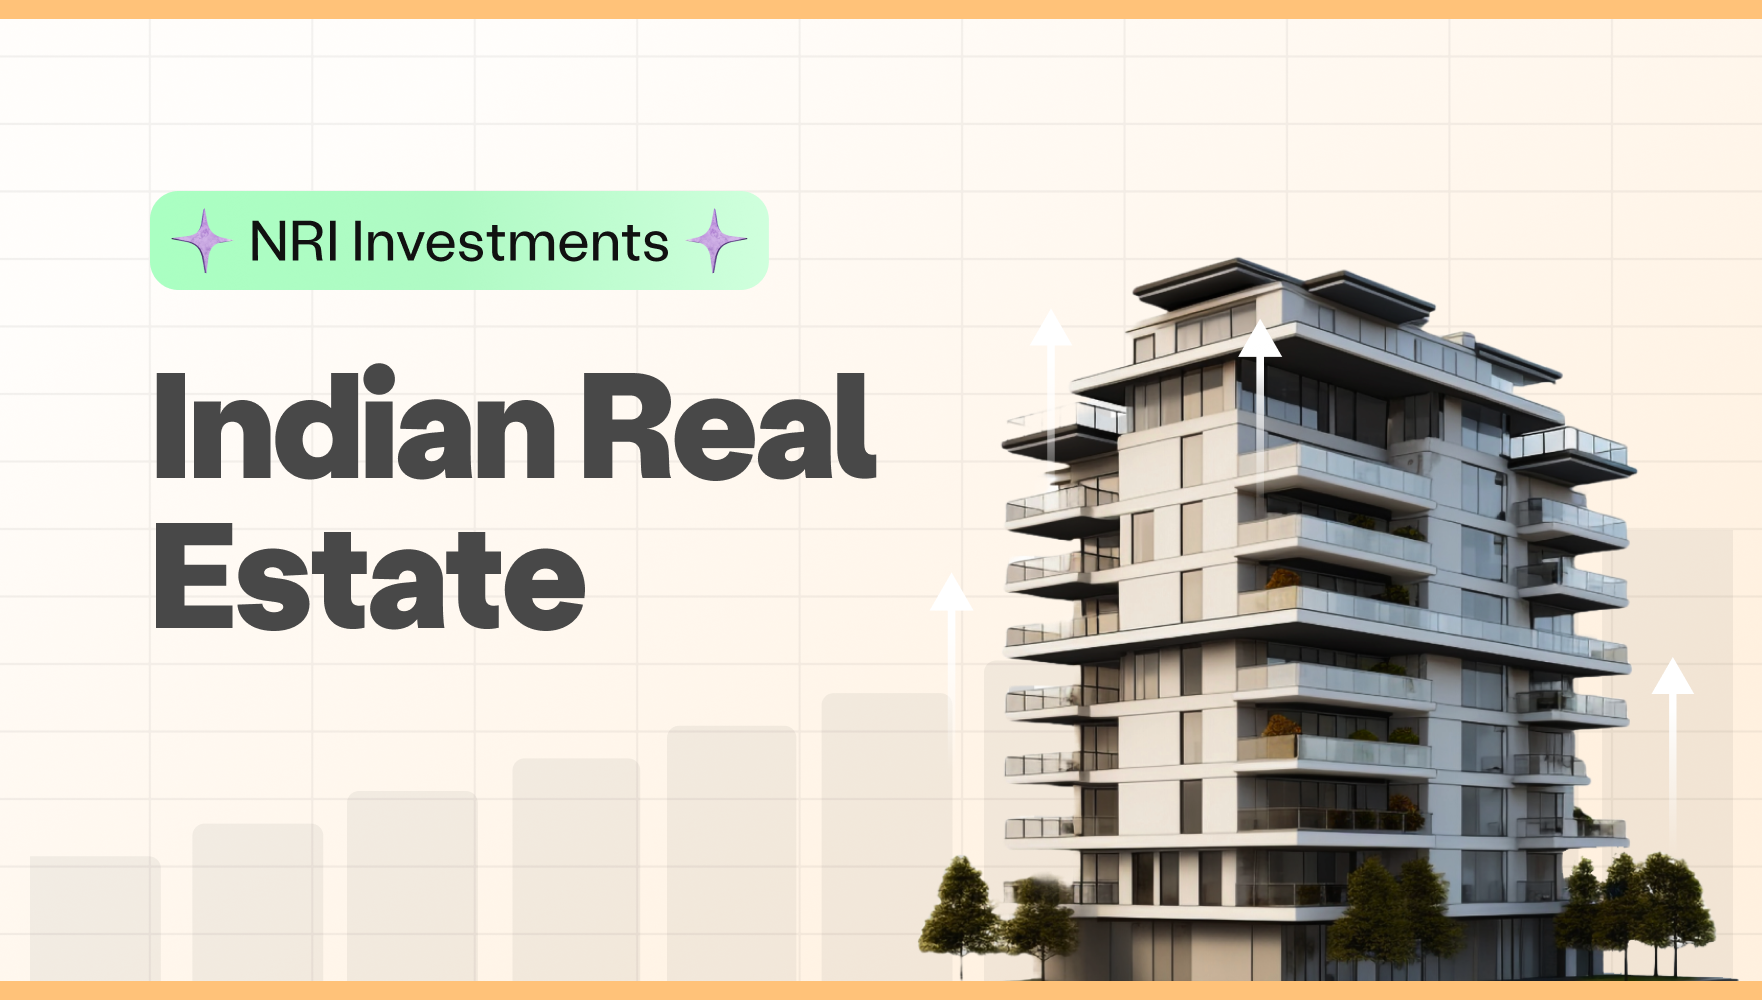 How NRI Investments are Shaping Indian Real Estate Market